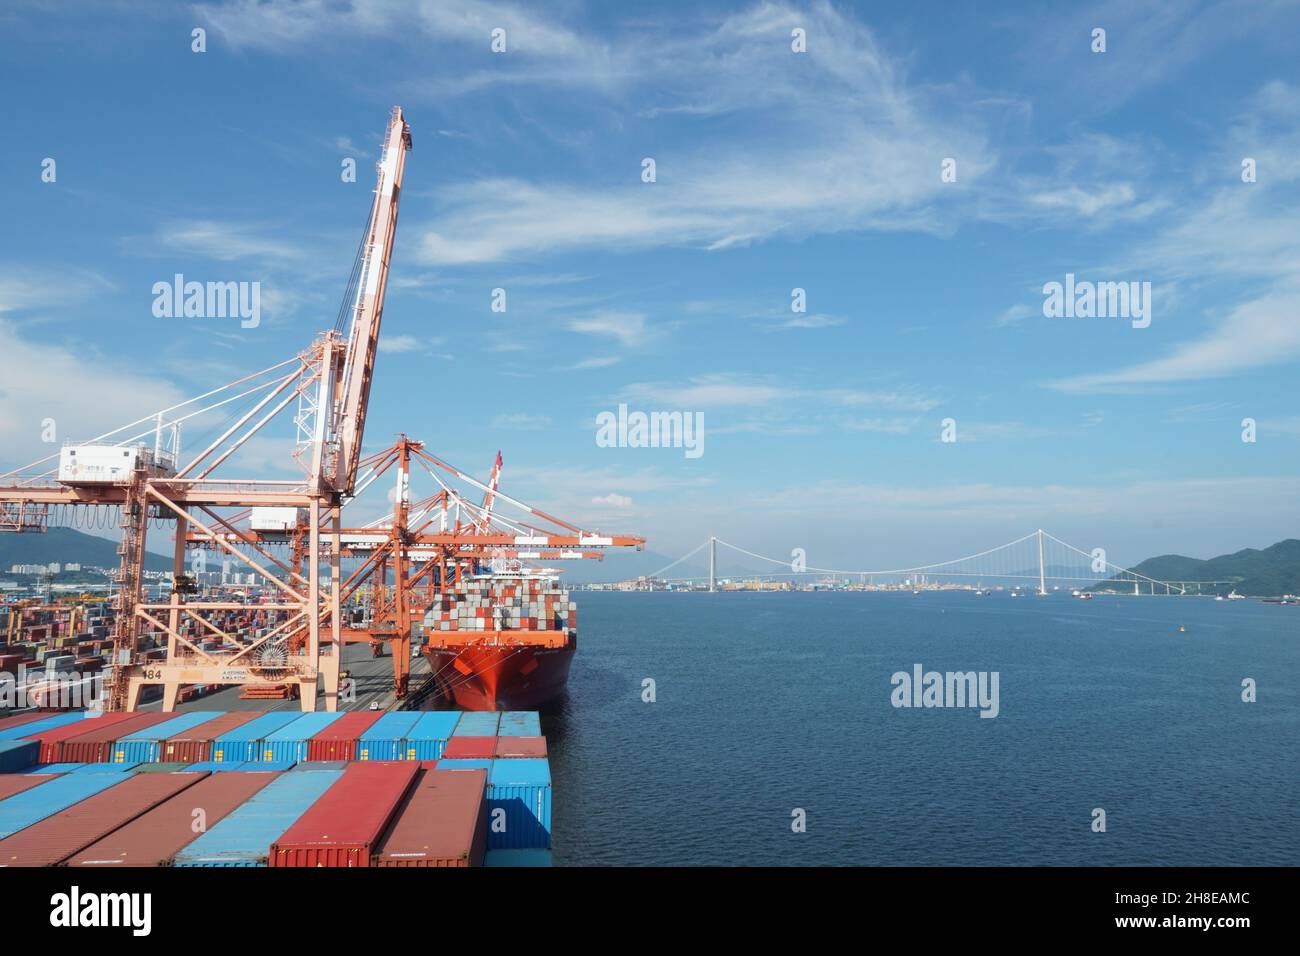 View on second largest container port in Korea, Kwangyang Port in Yeosu, south of Busan City. Stock Photo